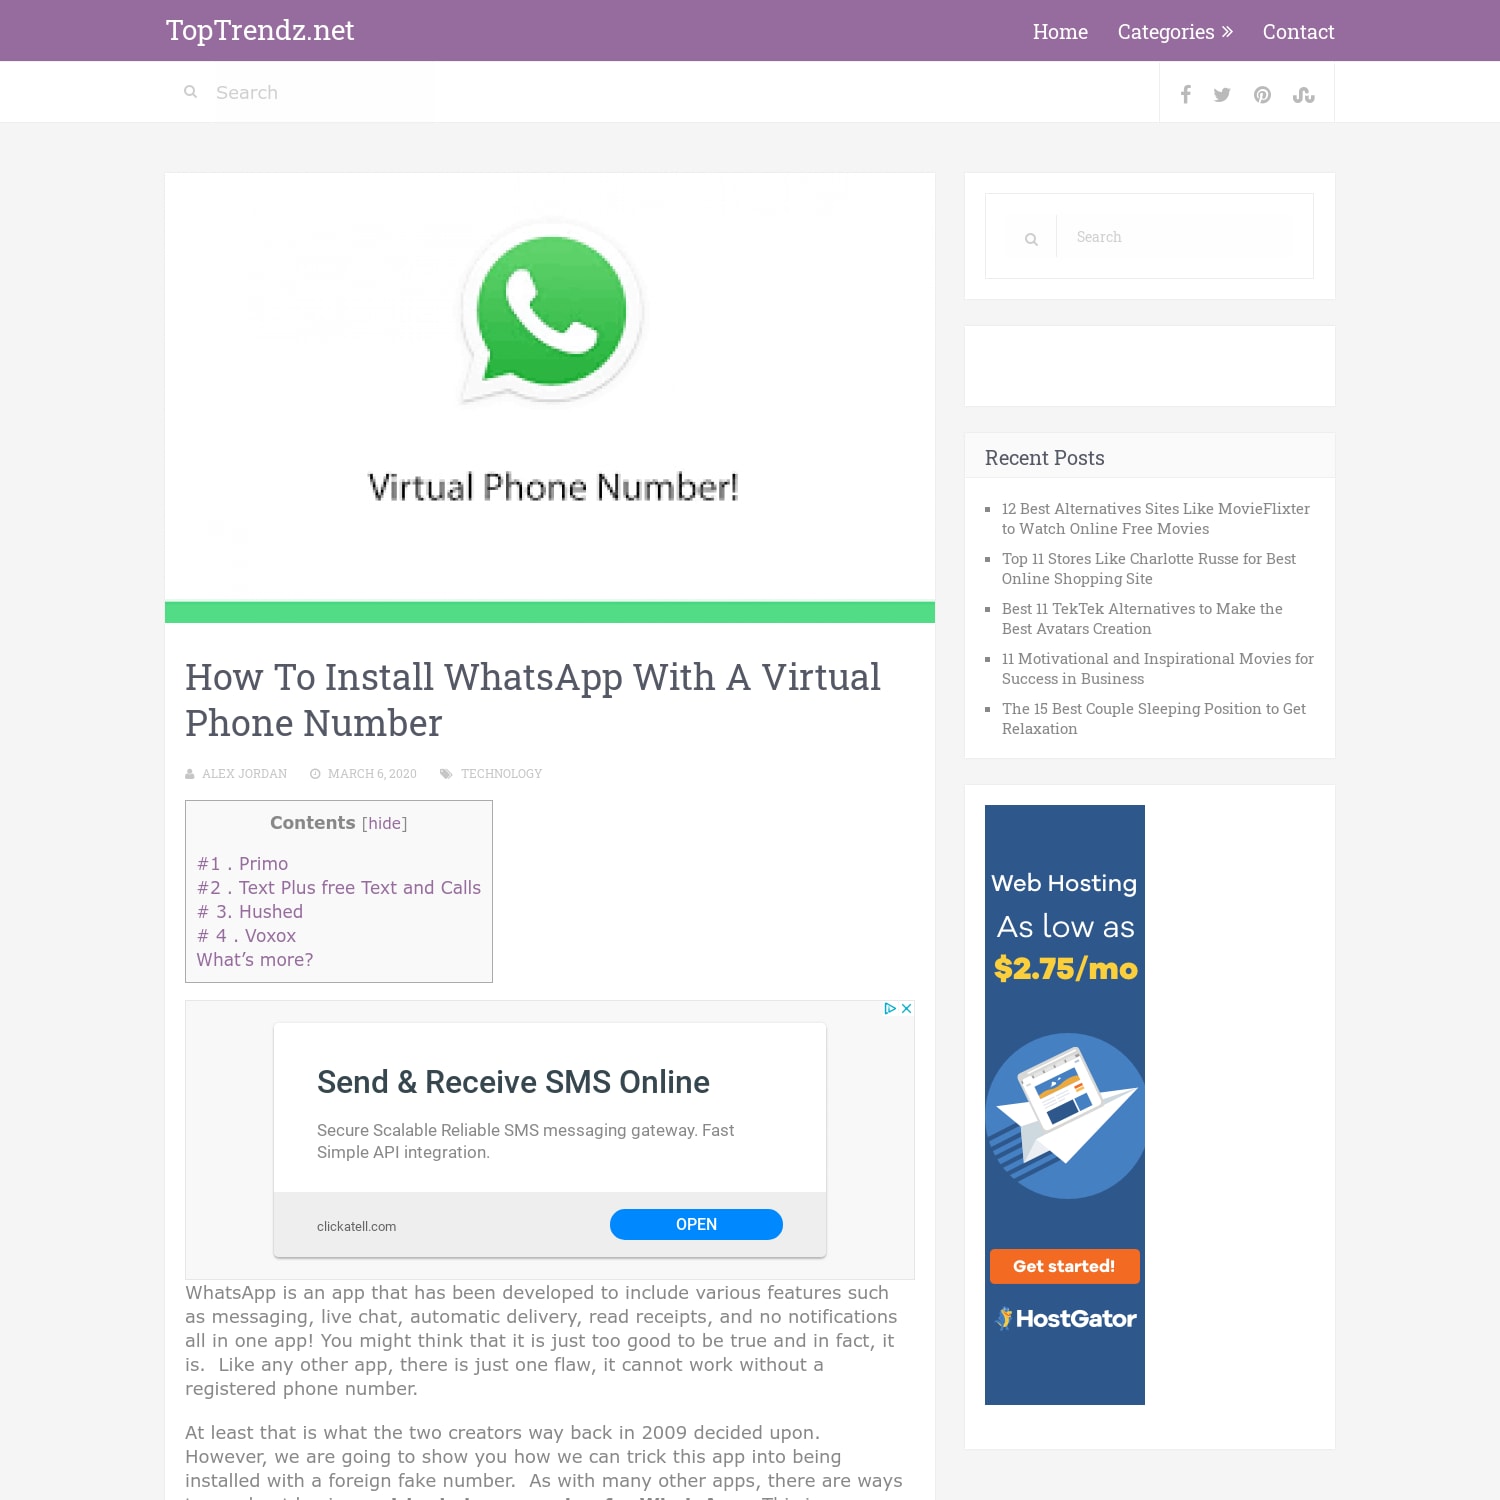 How To Install WhatsApp With A Virtual Phone Number